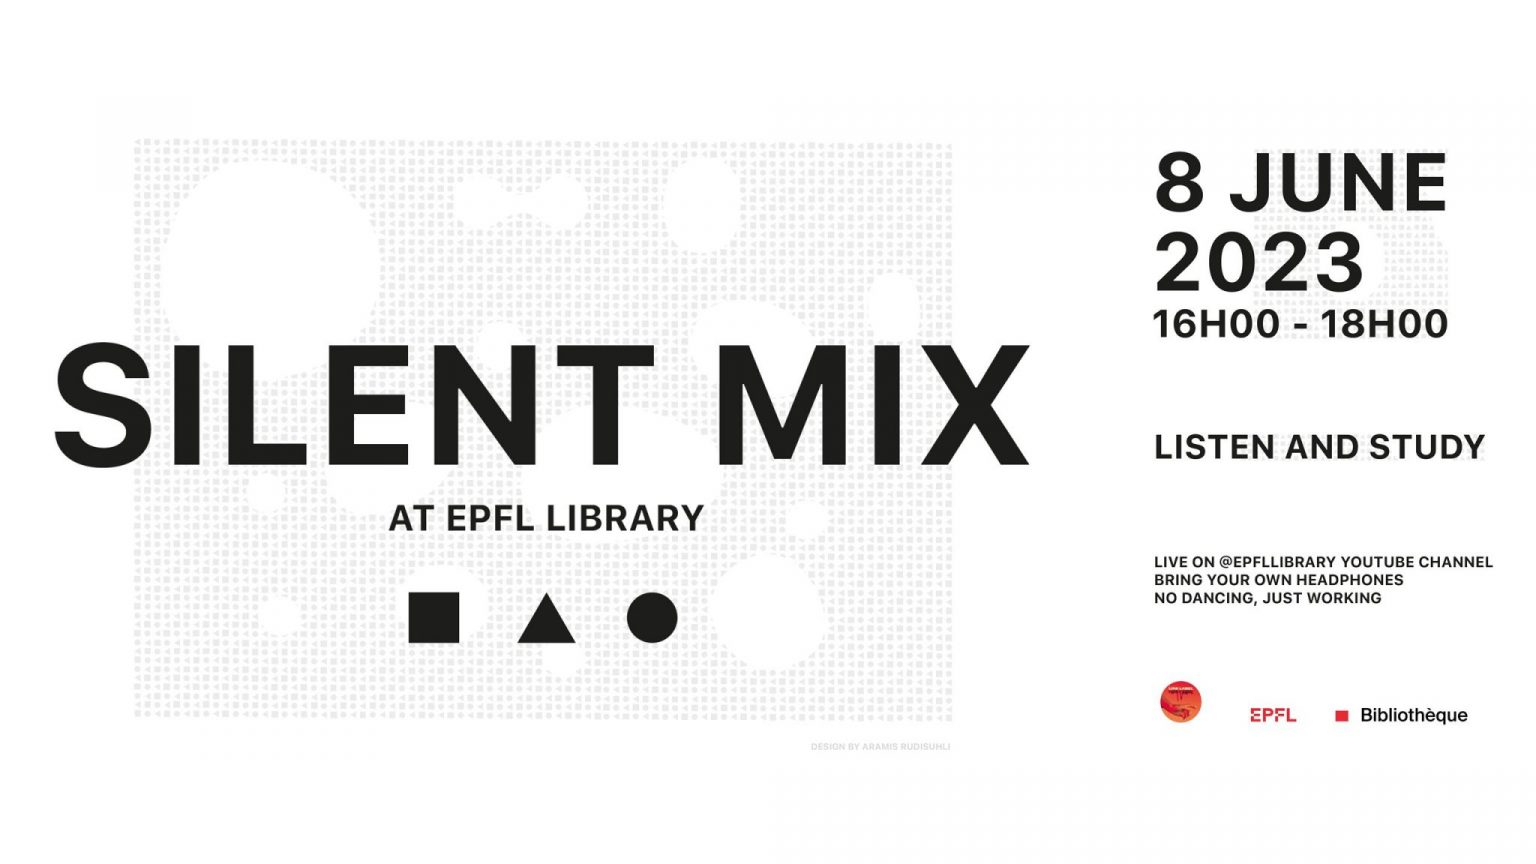 Silent Mix at EPFL Library "Listen and Study"